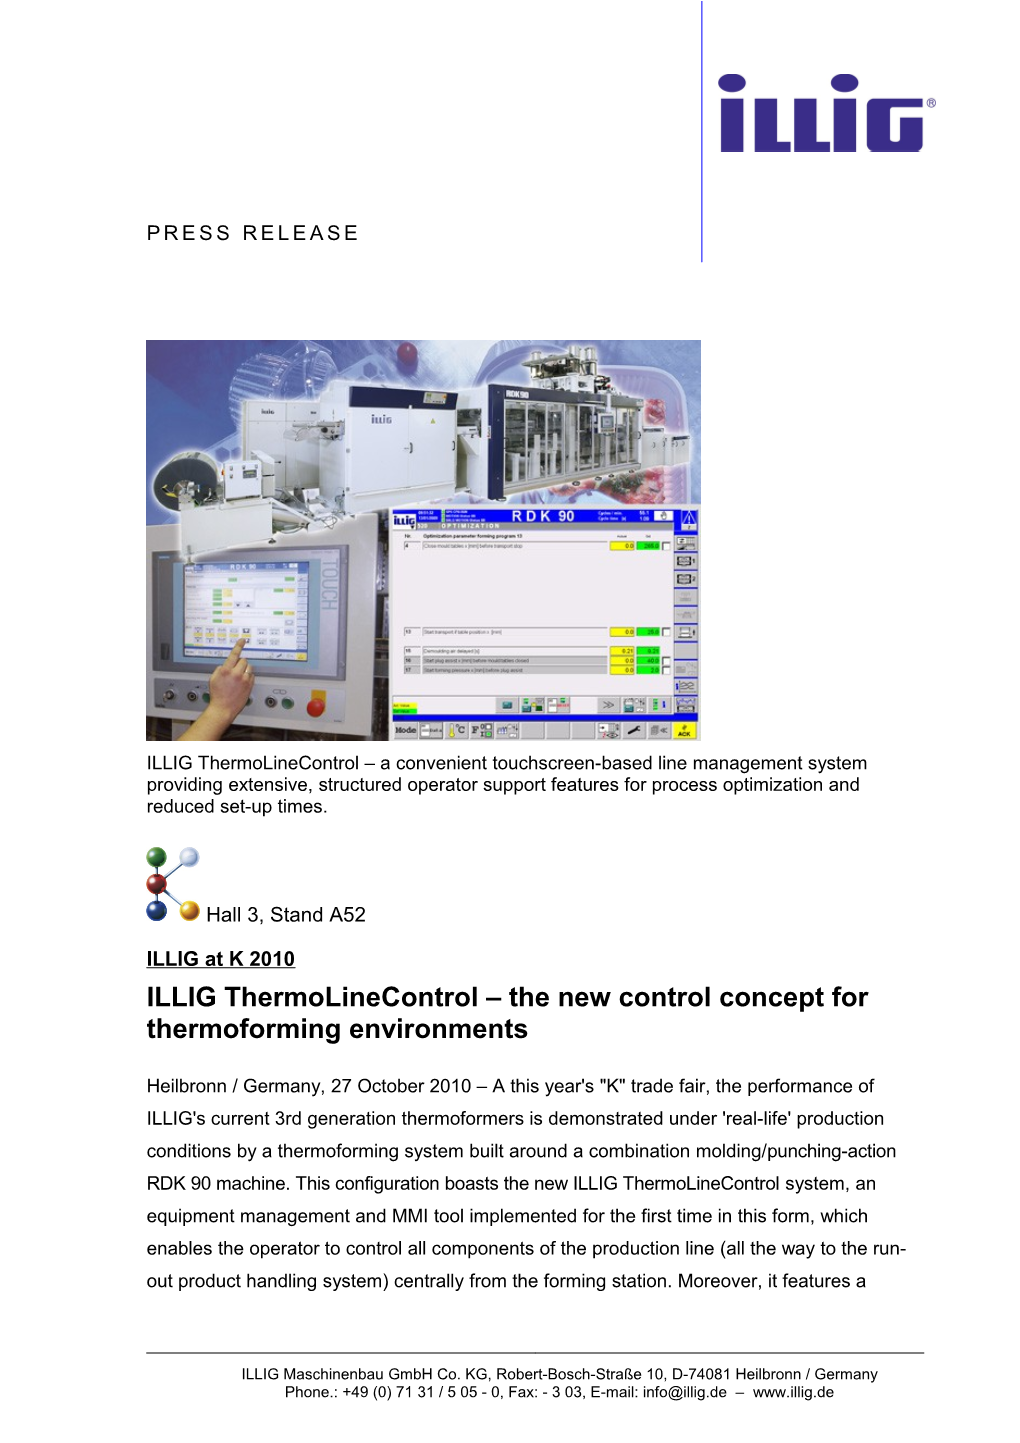 ILLIG Thermolinecontrol the New Control Concept for Thermoforming Environments